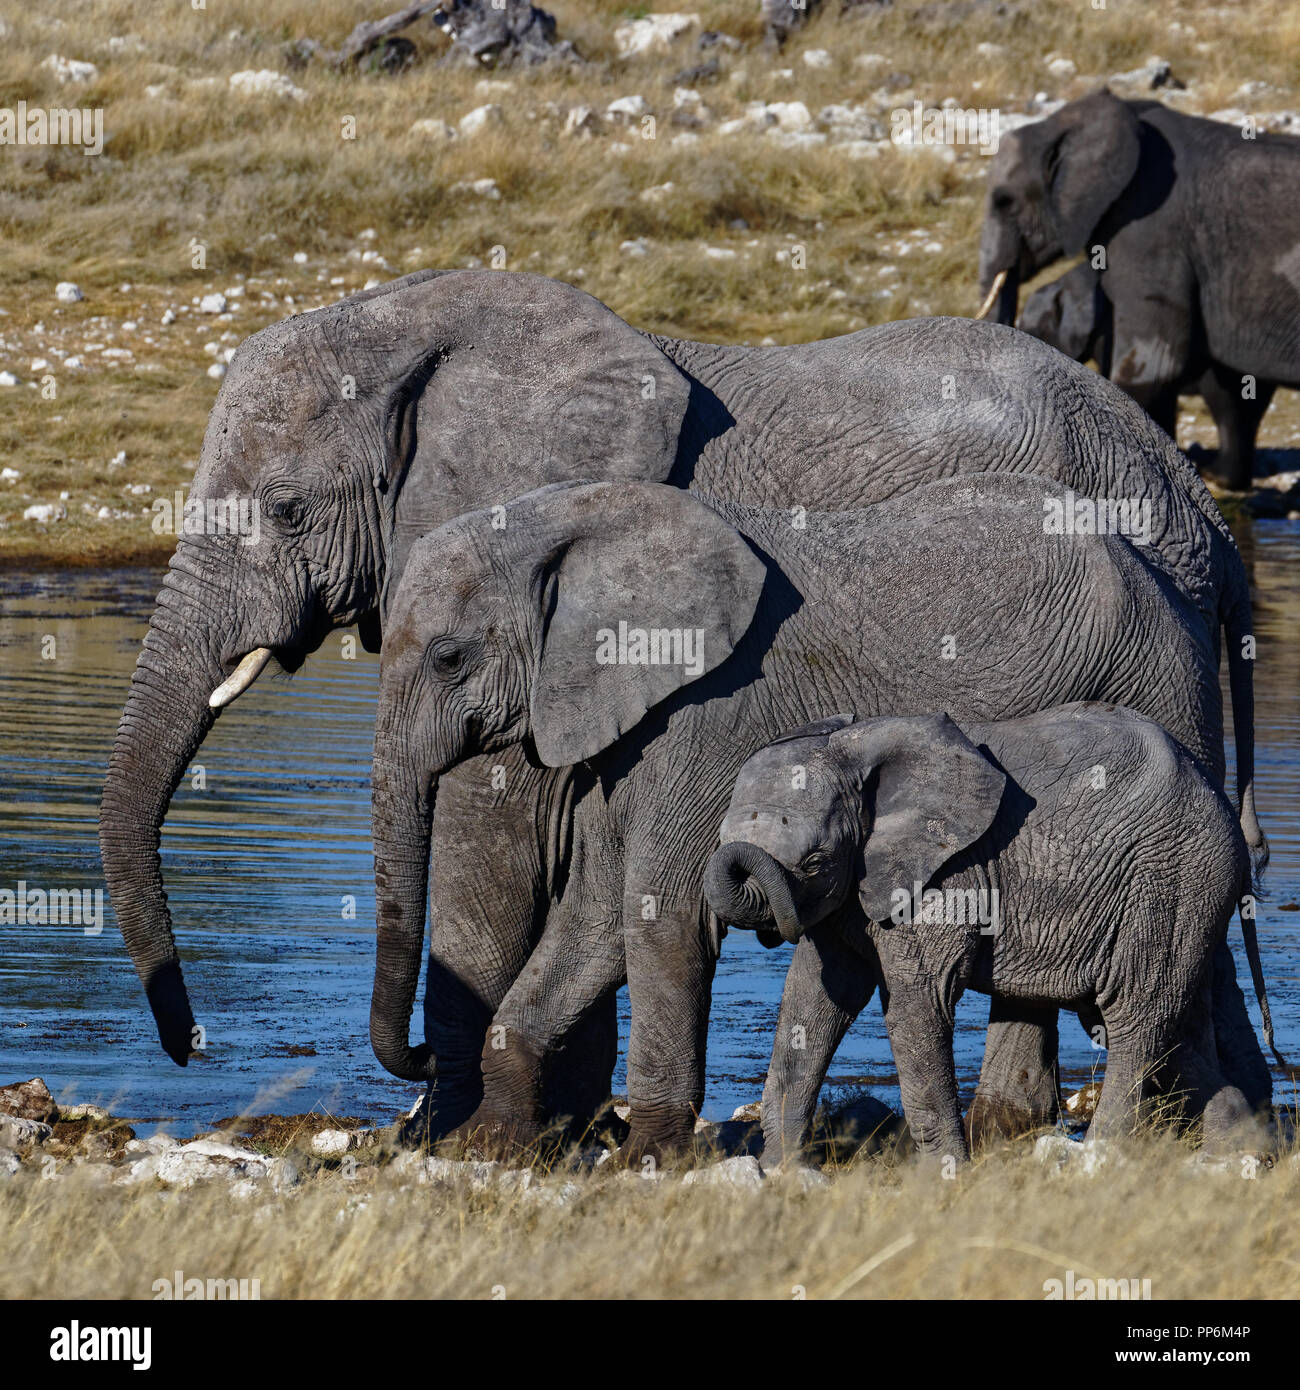 Small, medium or large. Elephants line up to be ordered by size at a waterhole in Etosha National Park, Namibia Stock Photo